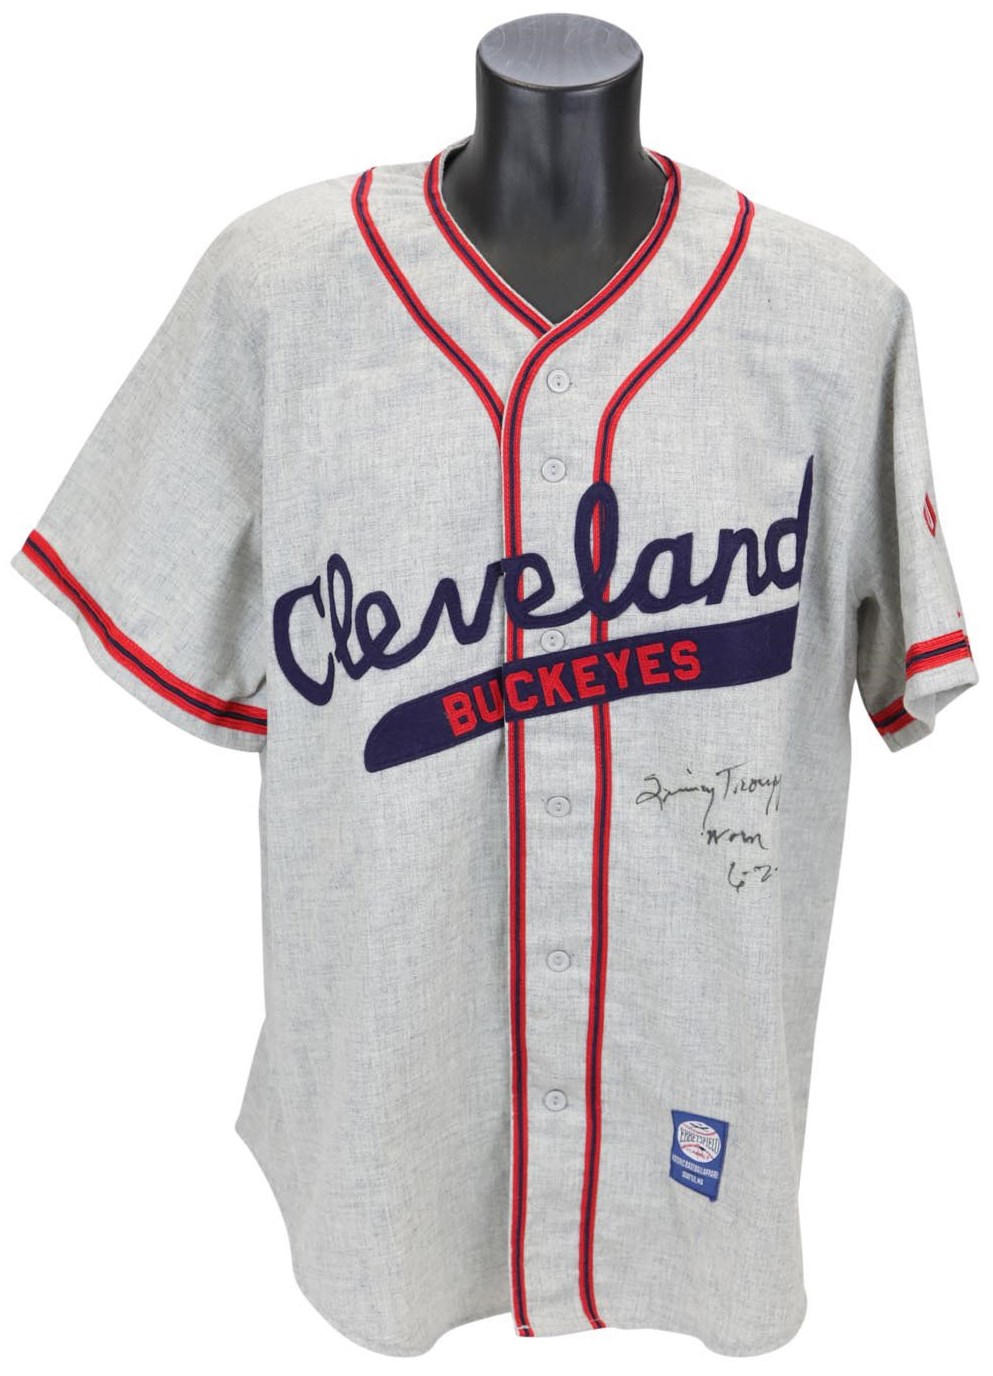 - 1992 Quincy Trouppe Cleveland Buckeyes Signed "Game Worn" Jersey (Shea Stadium)